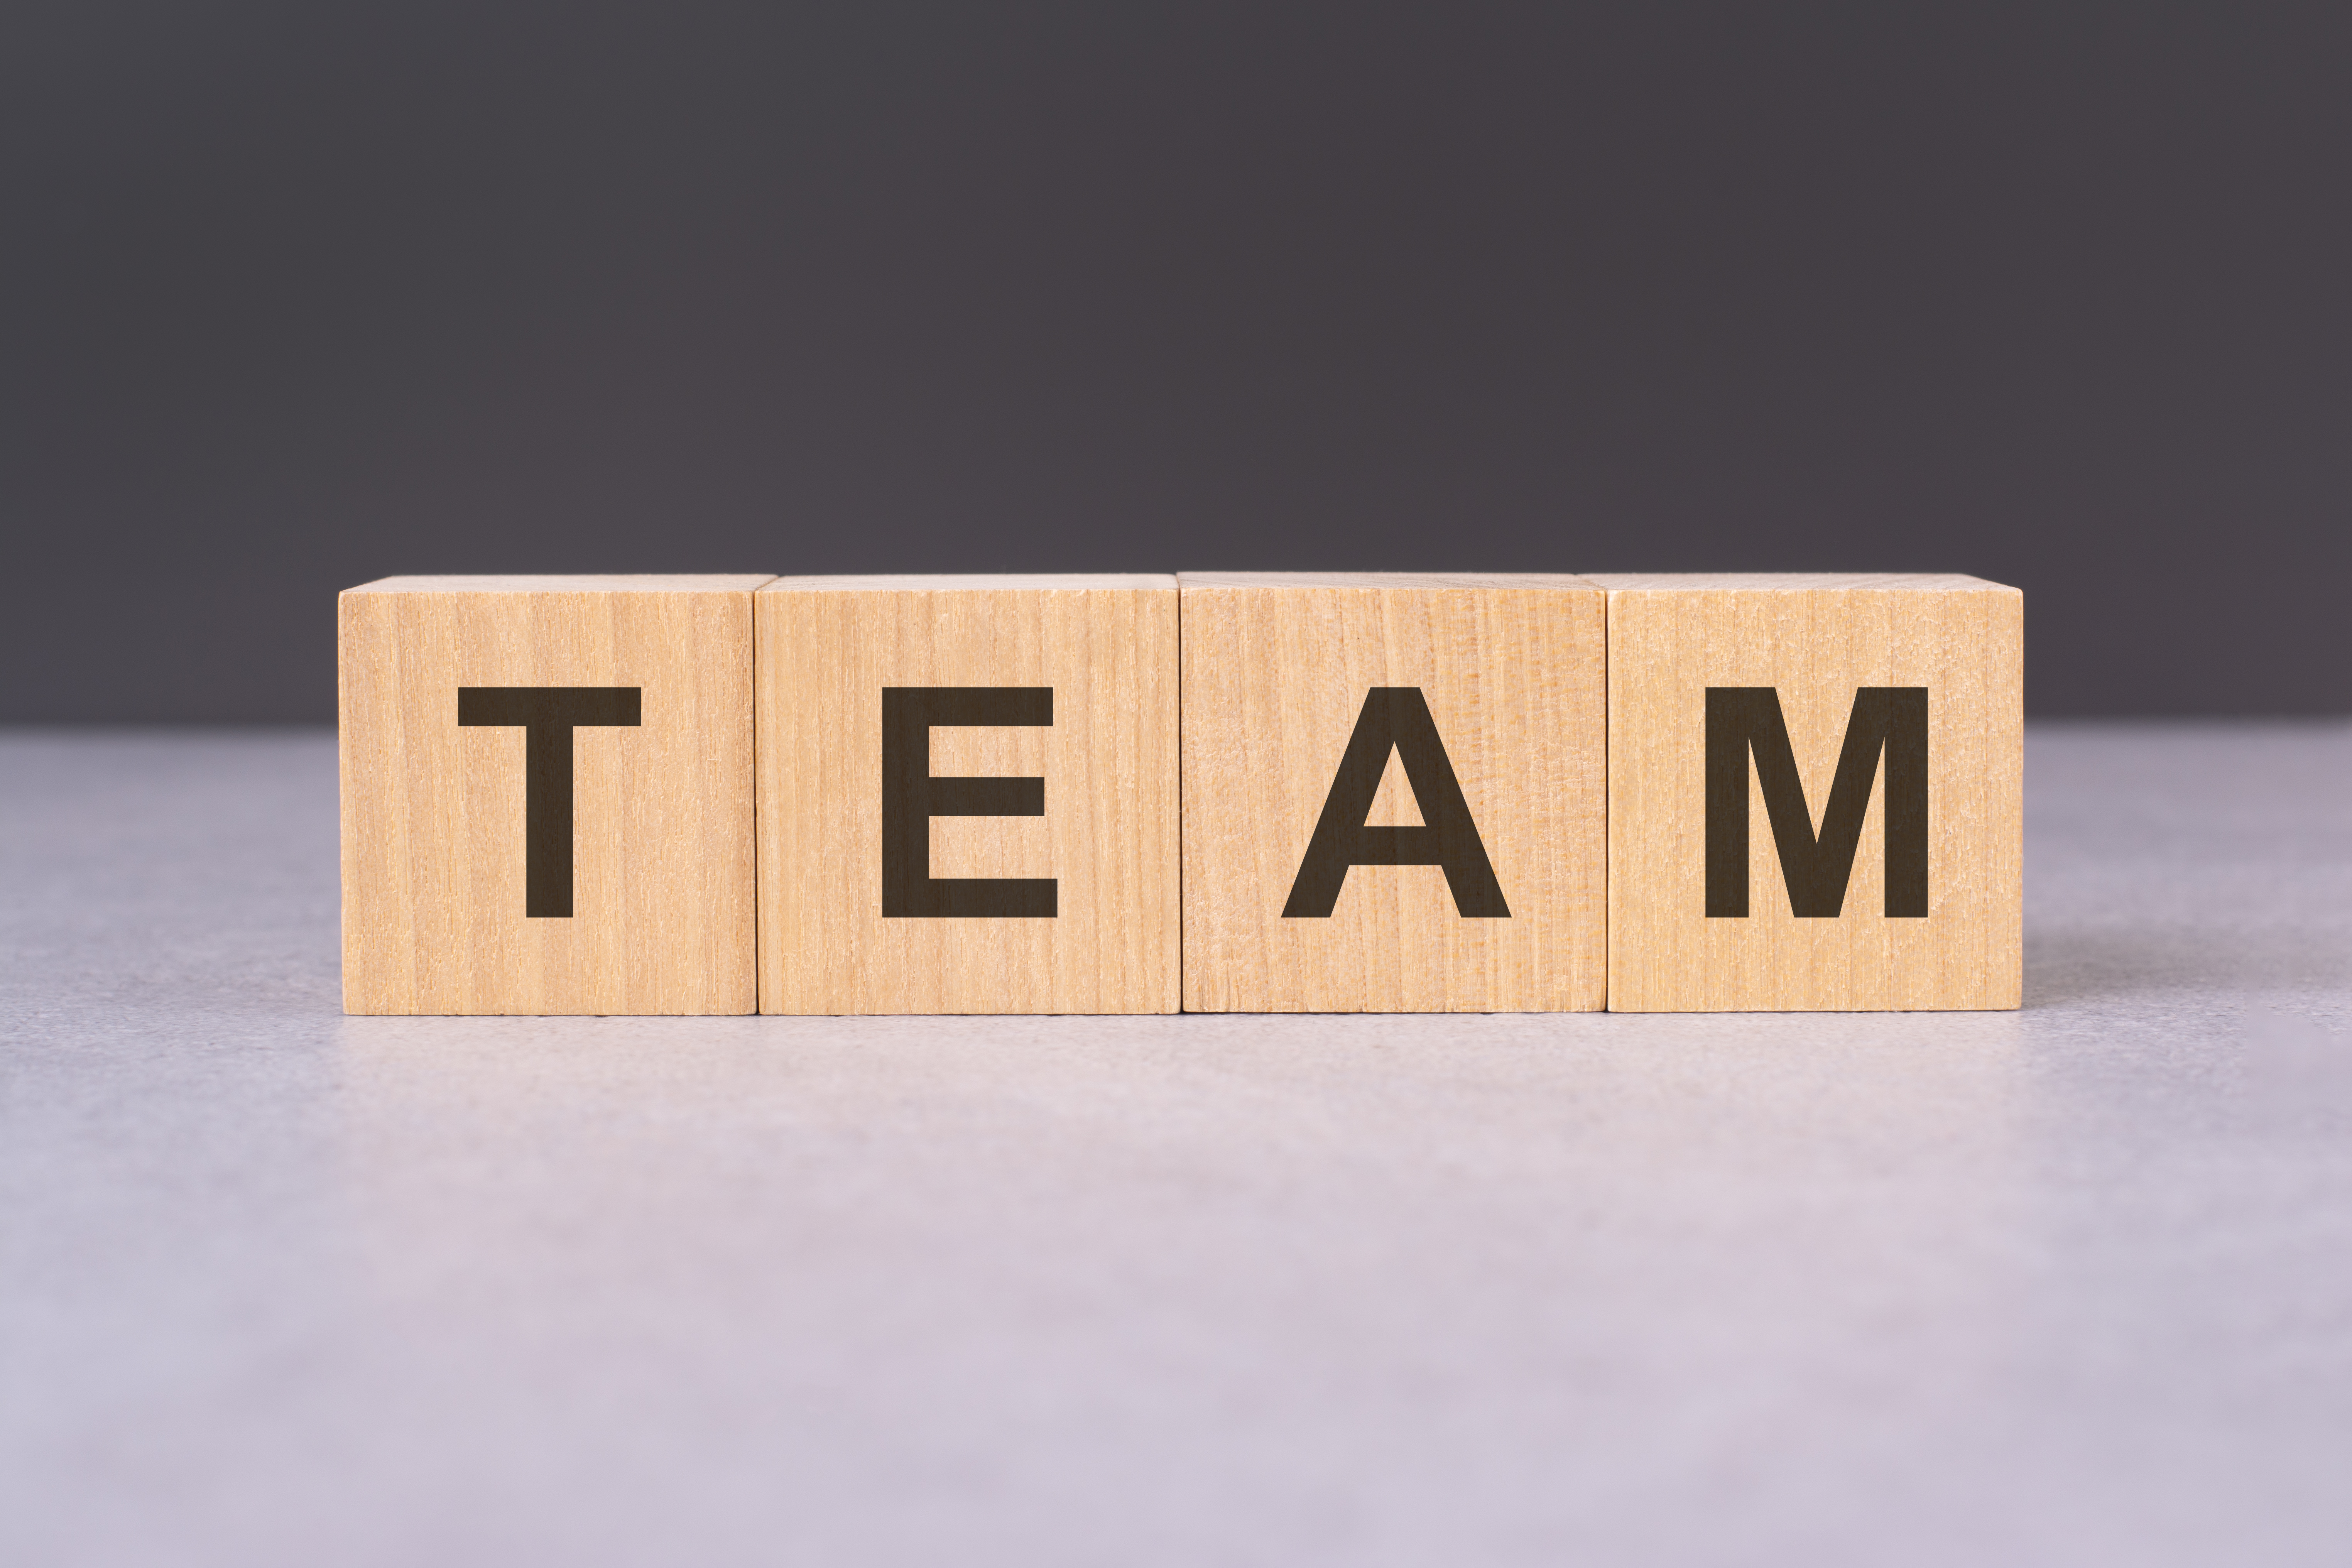 cubes form the word team concept emphasizing the significance of teamwork and collaboration symbolizing unity coordination and joint efforts towards common goals